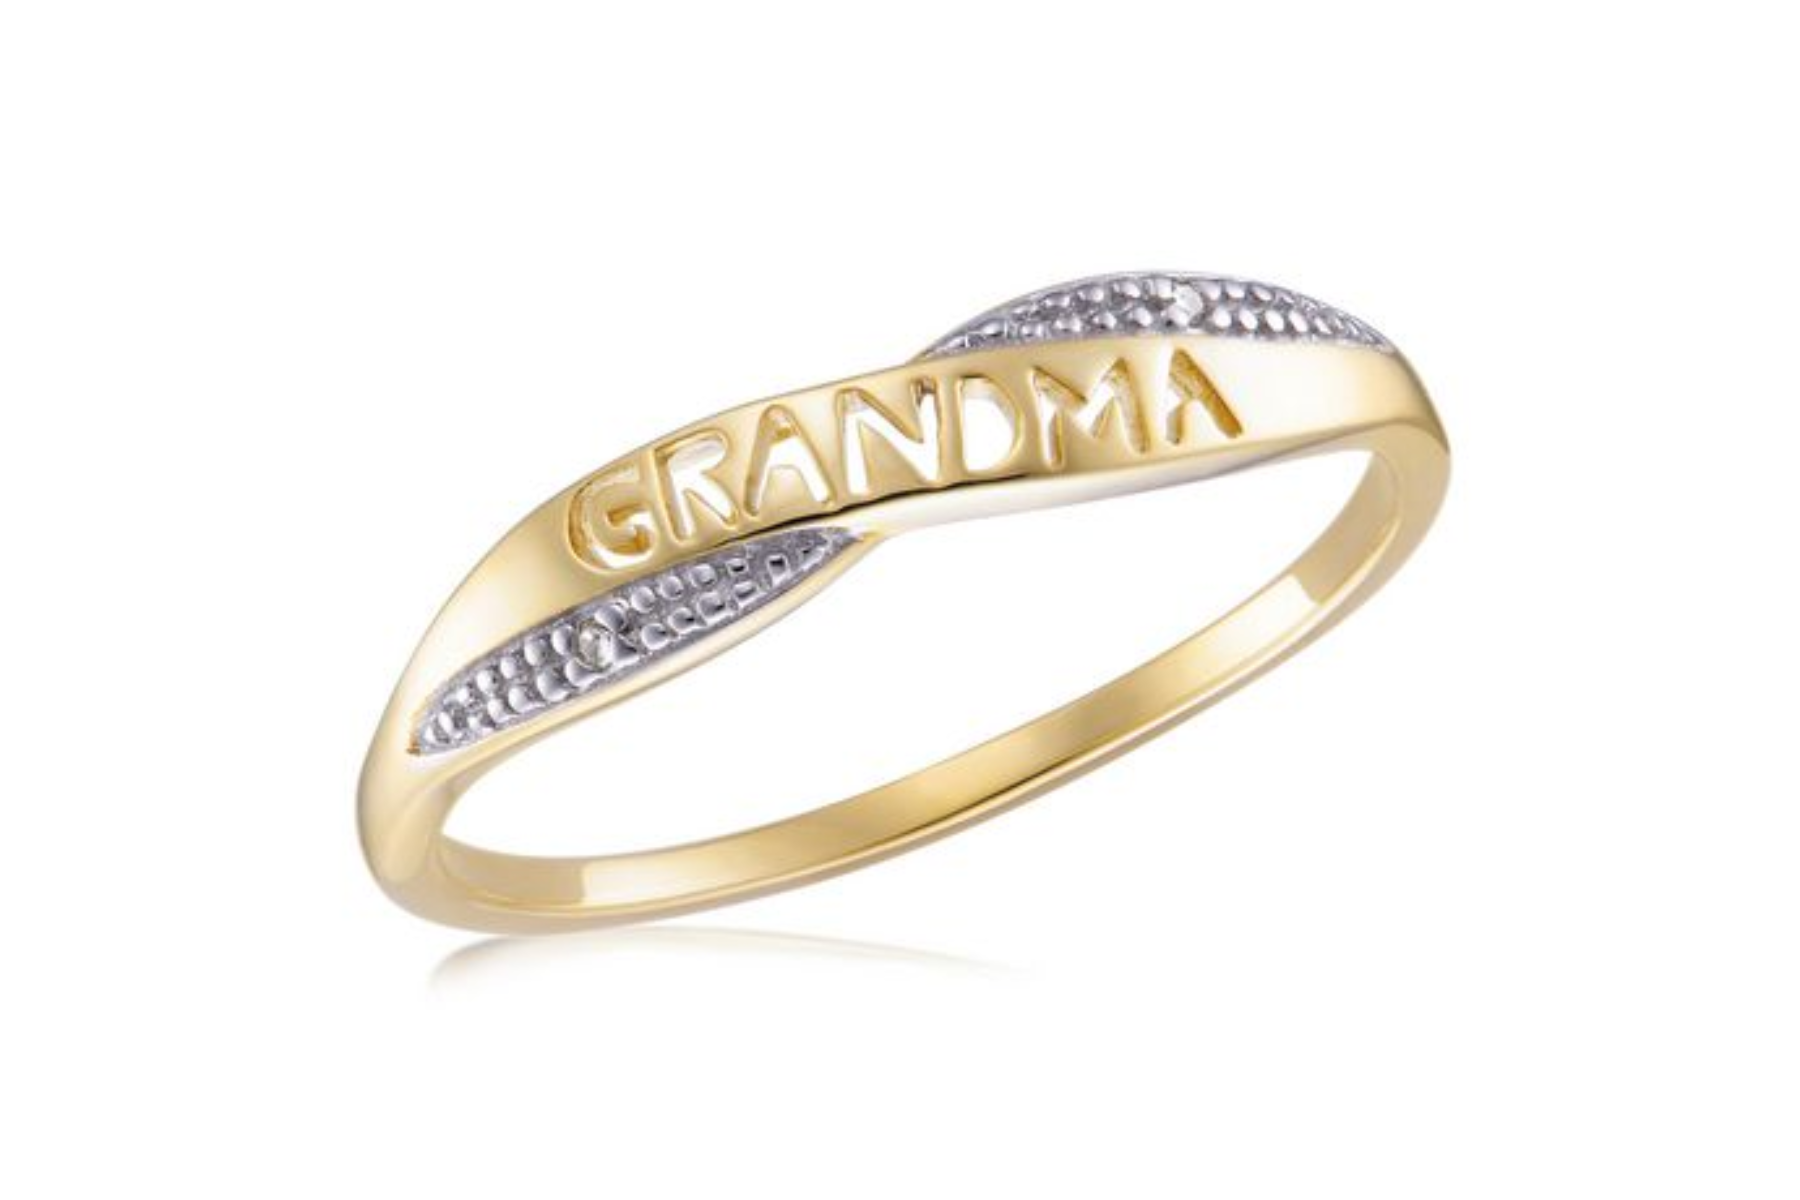 Grandma ring in 10-kt yellow gold with 2x.0033 diamond accents